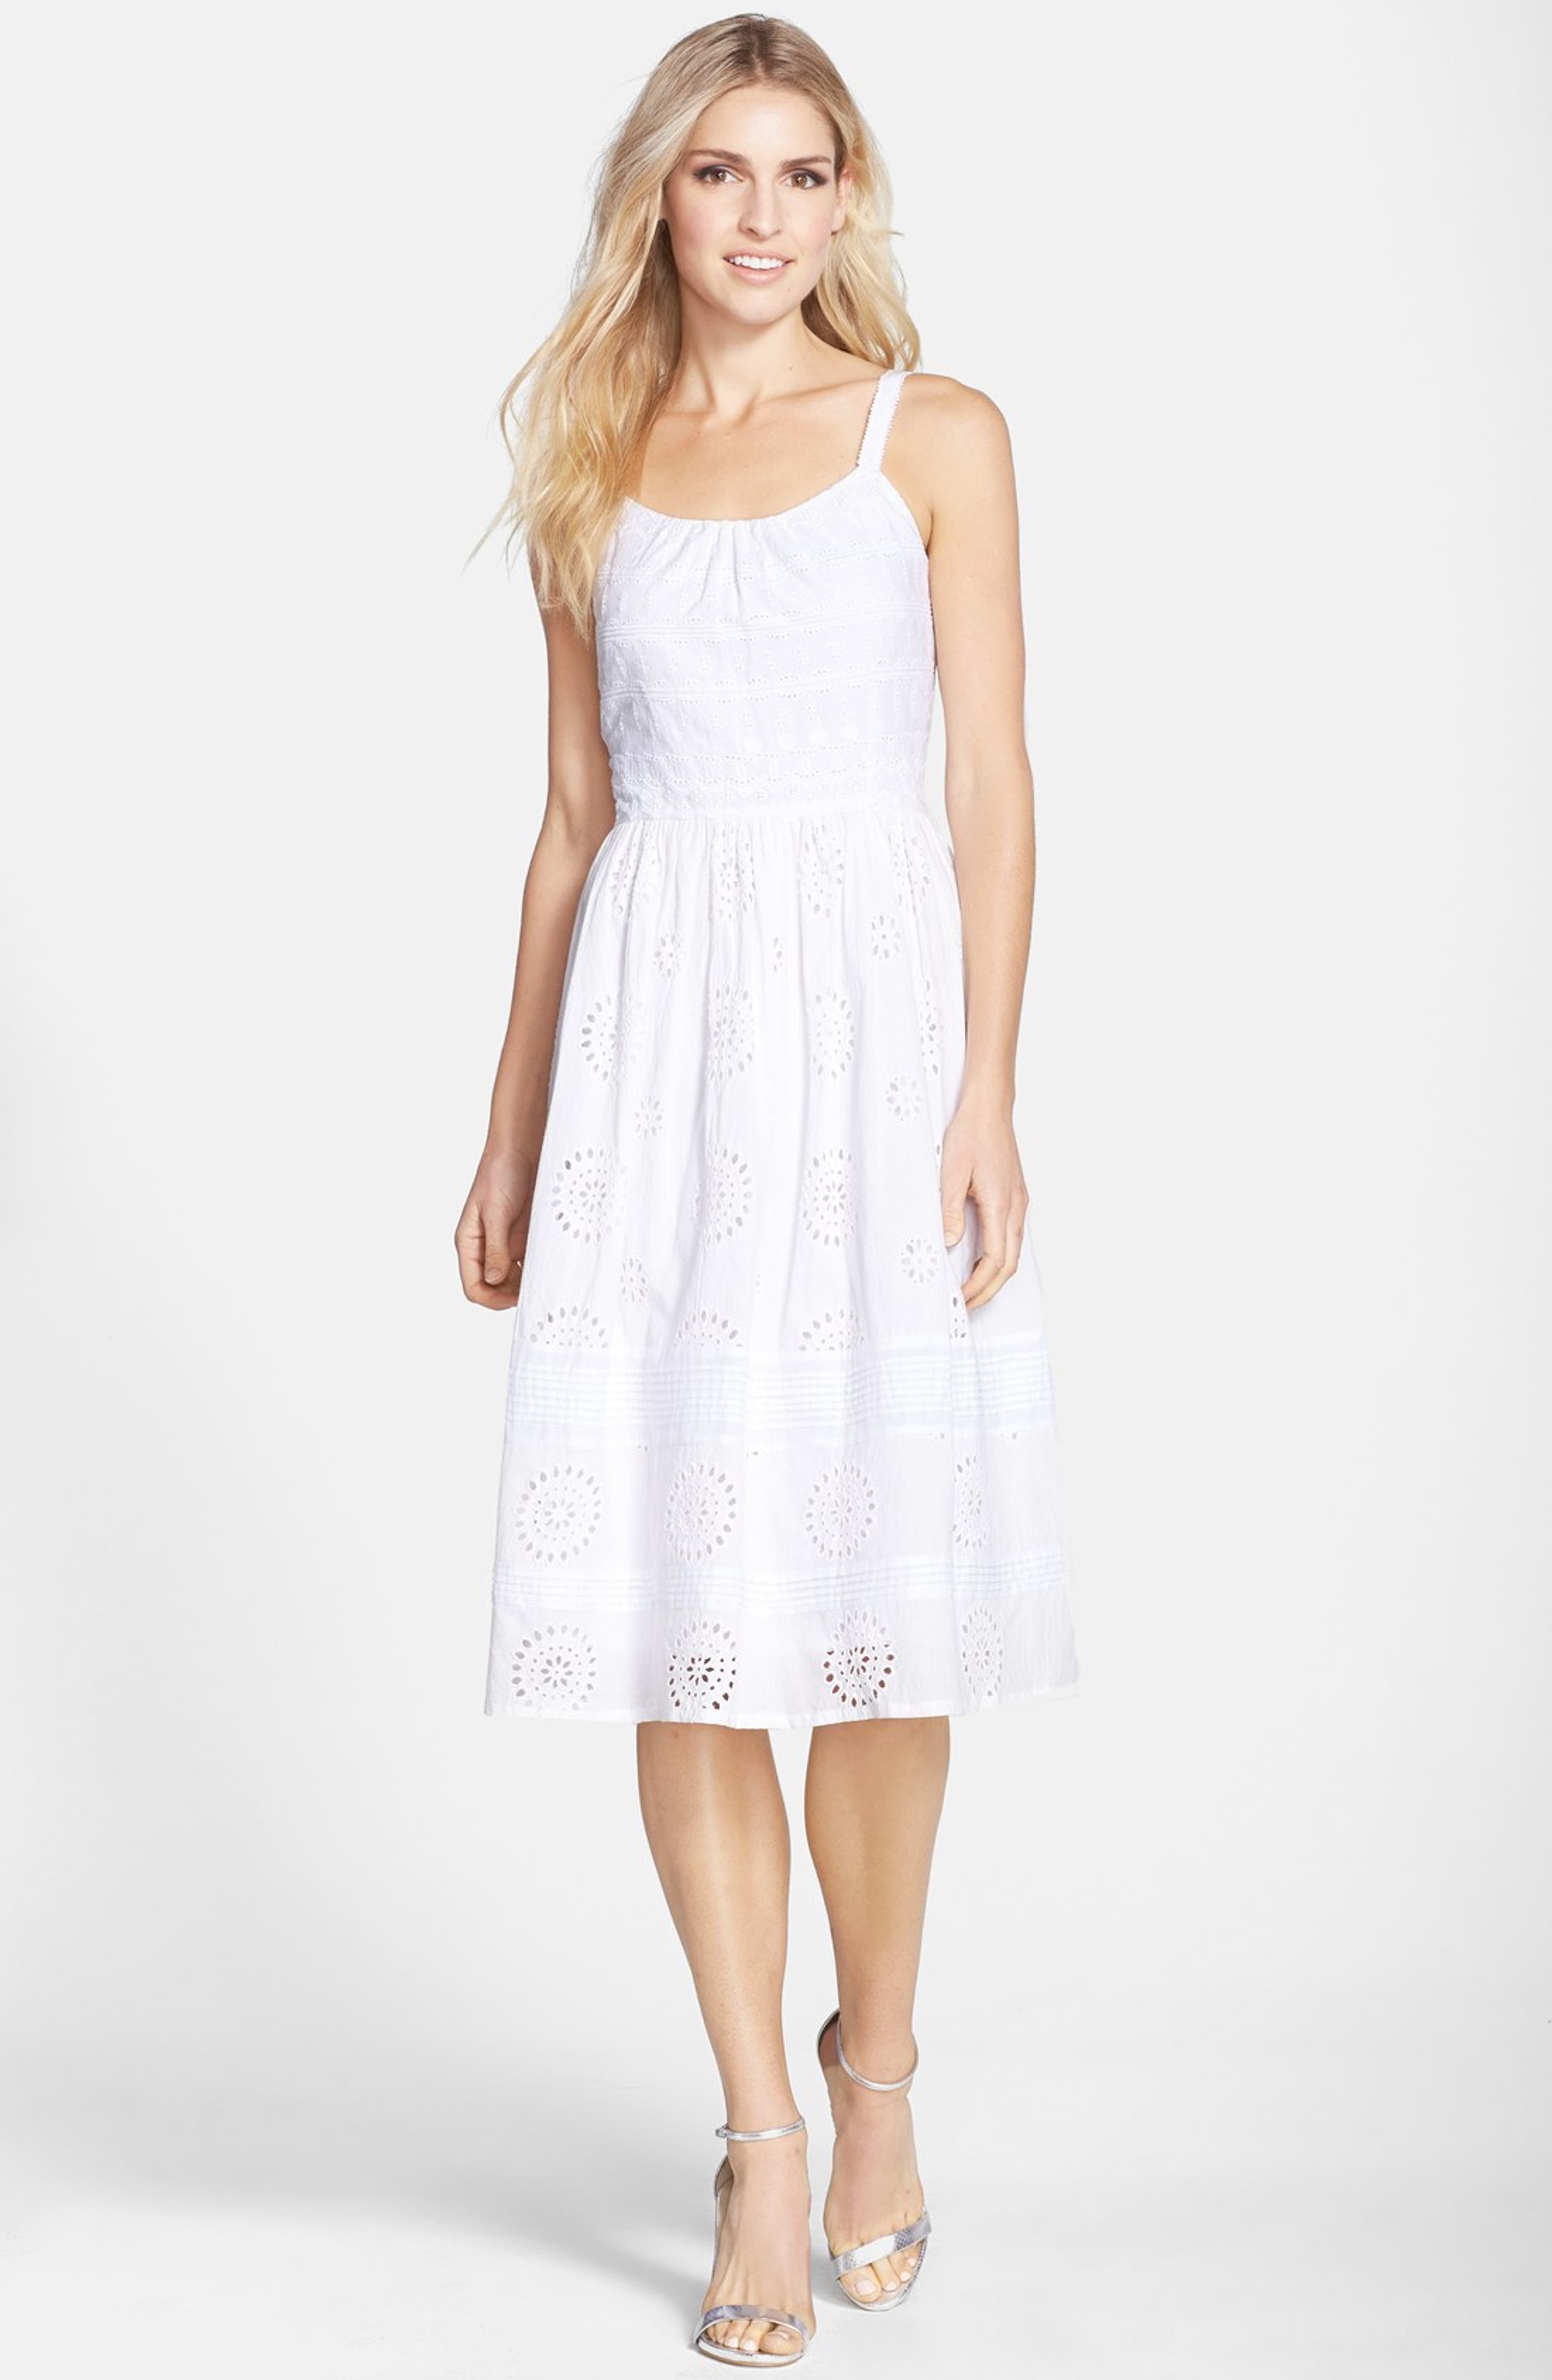 Adrianna Papell Eyelet Cotton Fit & Flare Midi Dress | Nordstrom